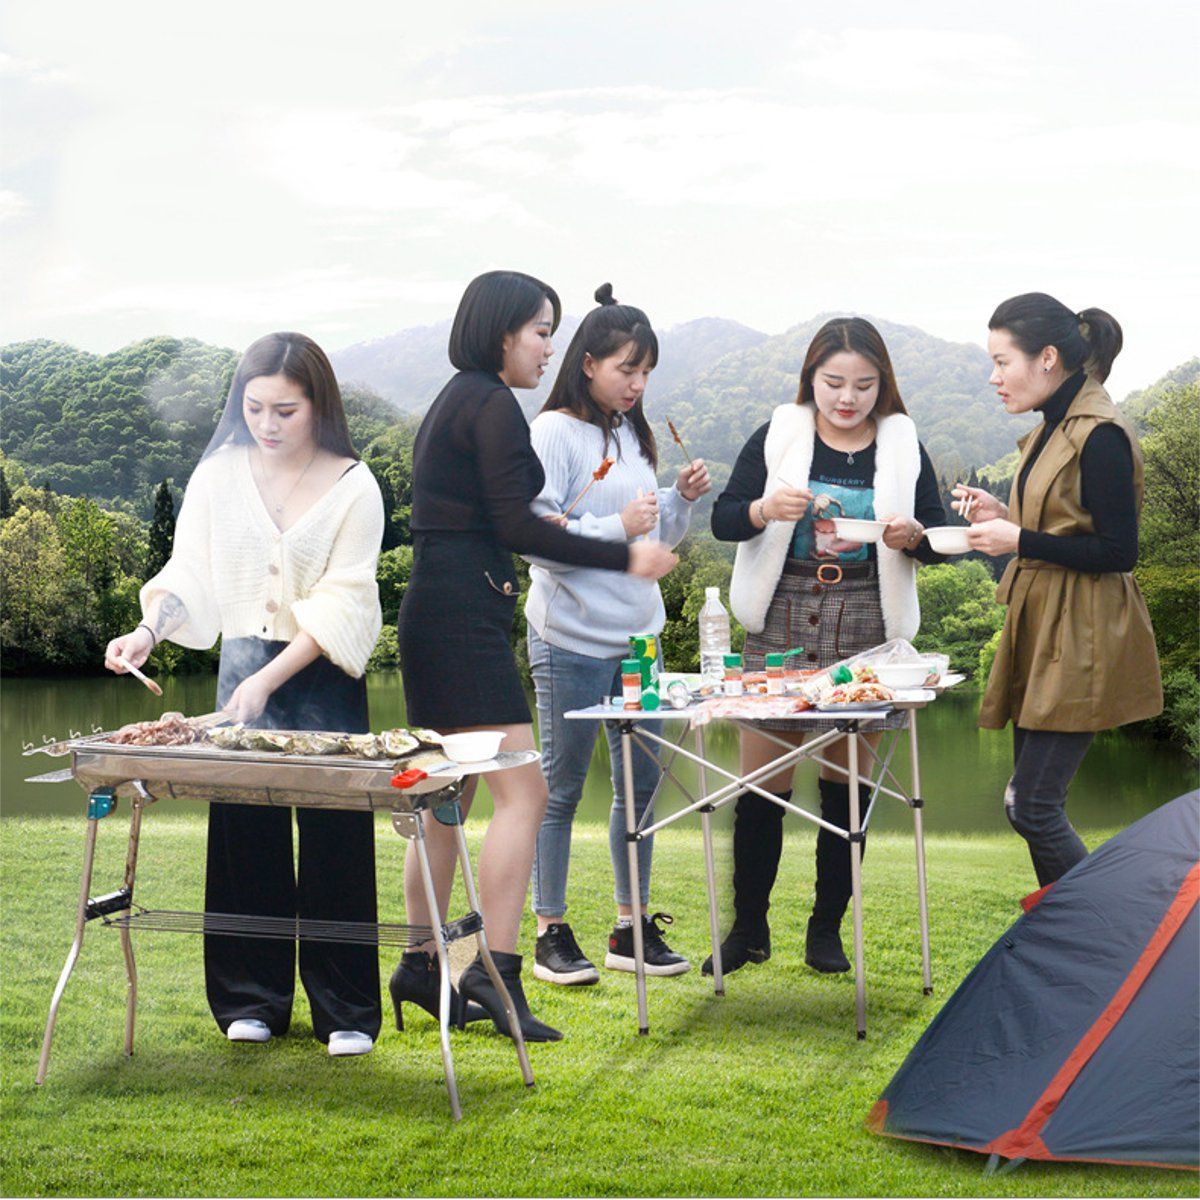 Foldable-Charcoal-BBQ-Grill-Grill-Plate-Stove-Kebab-Barbecue-Patio-Camping-Party-1680298